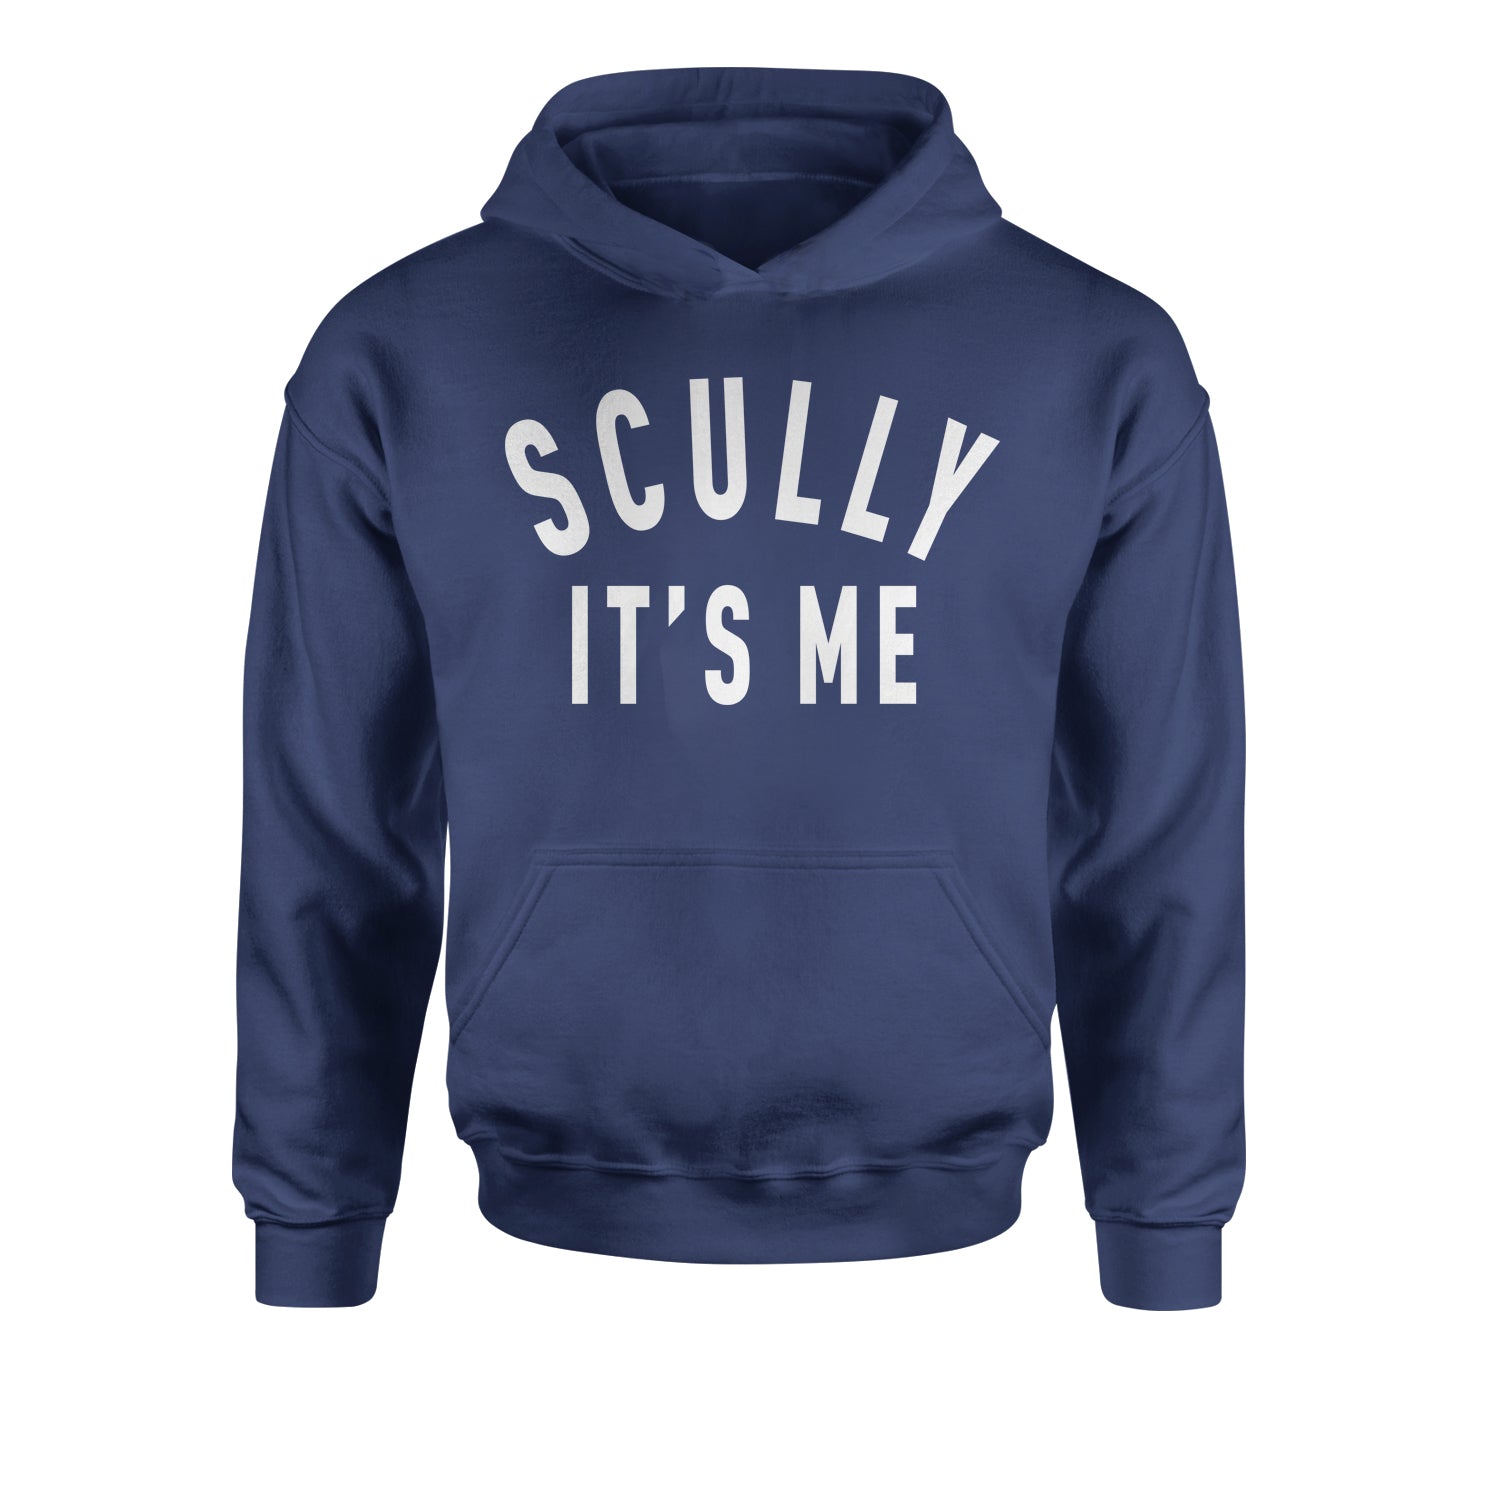 Scully, It's Me Youth-Sized Hoodie #expressiontees by Expression Tees